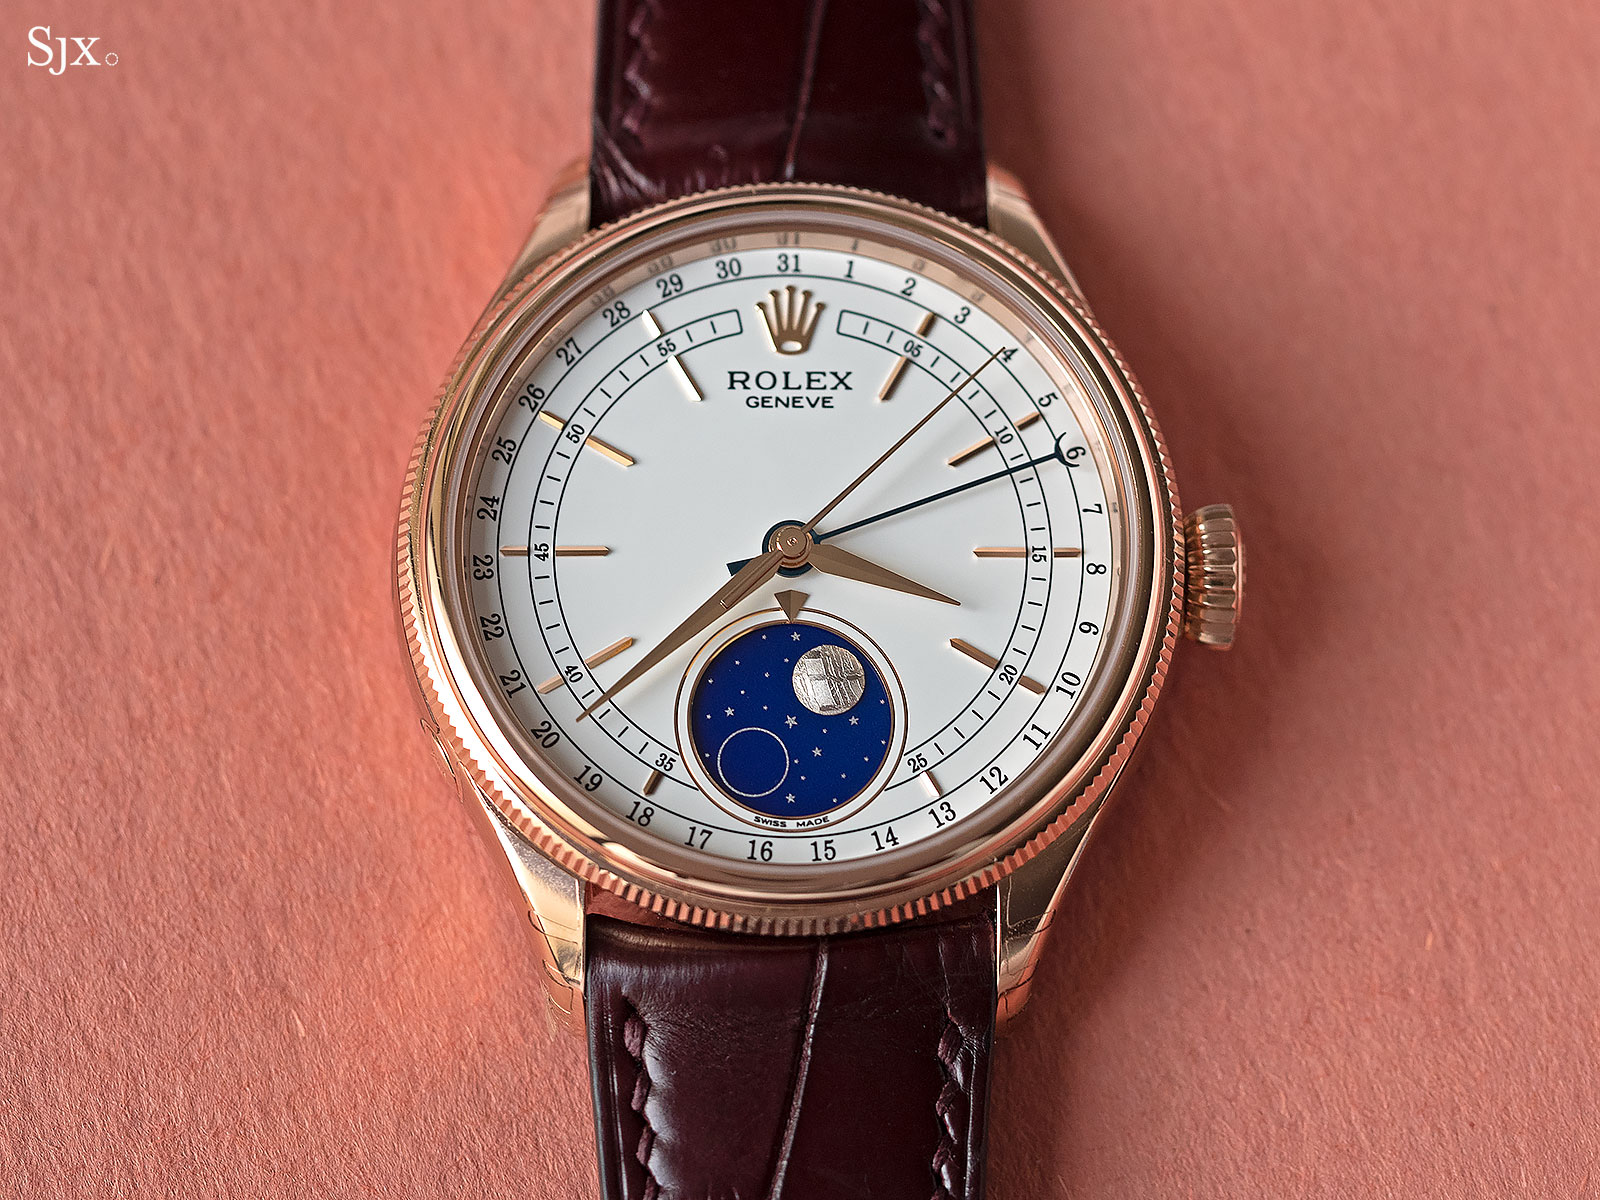 Rolex Cellini Moonphase 50535 review 10